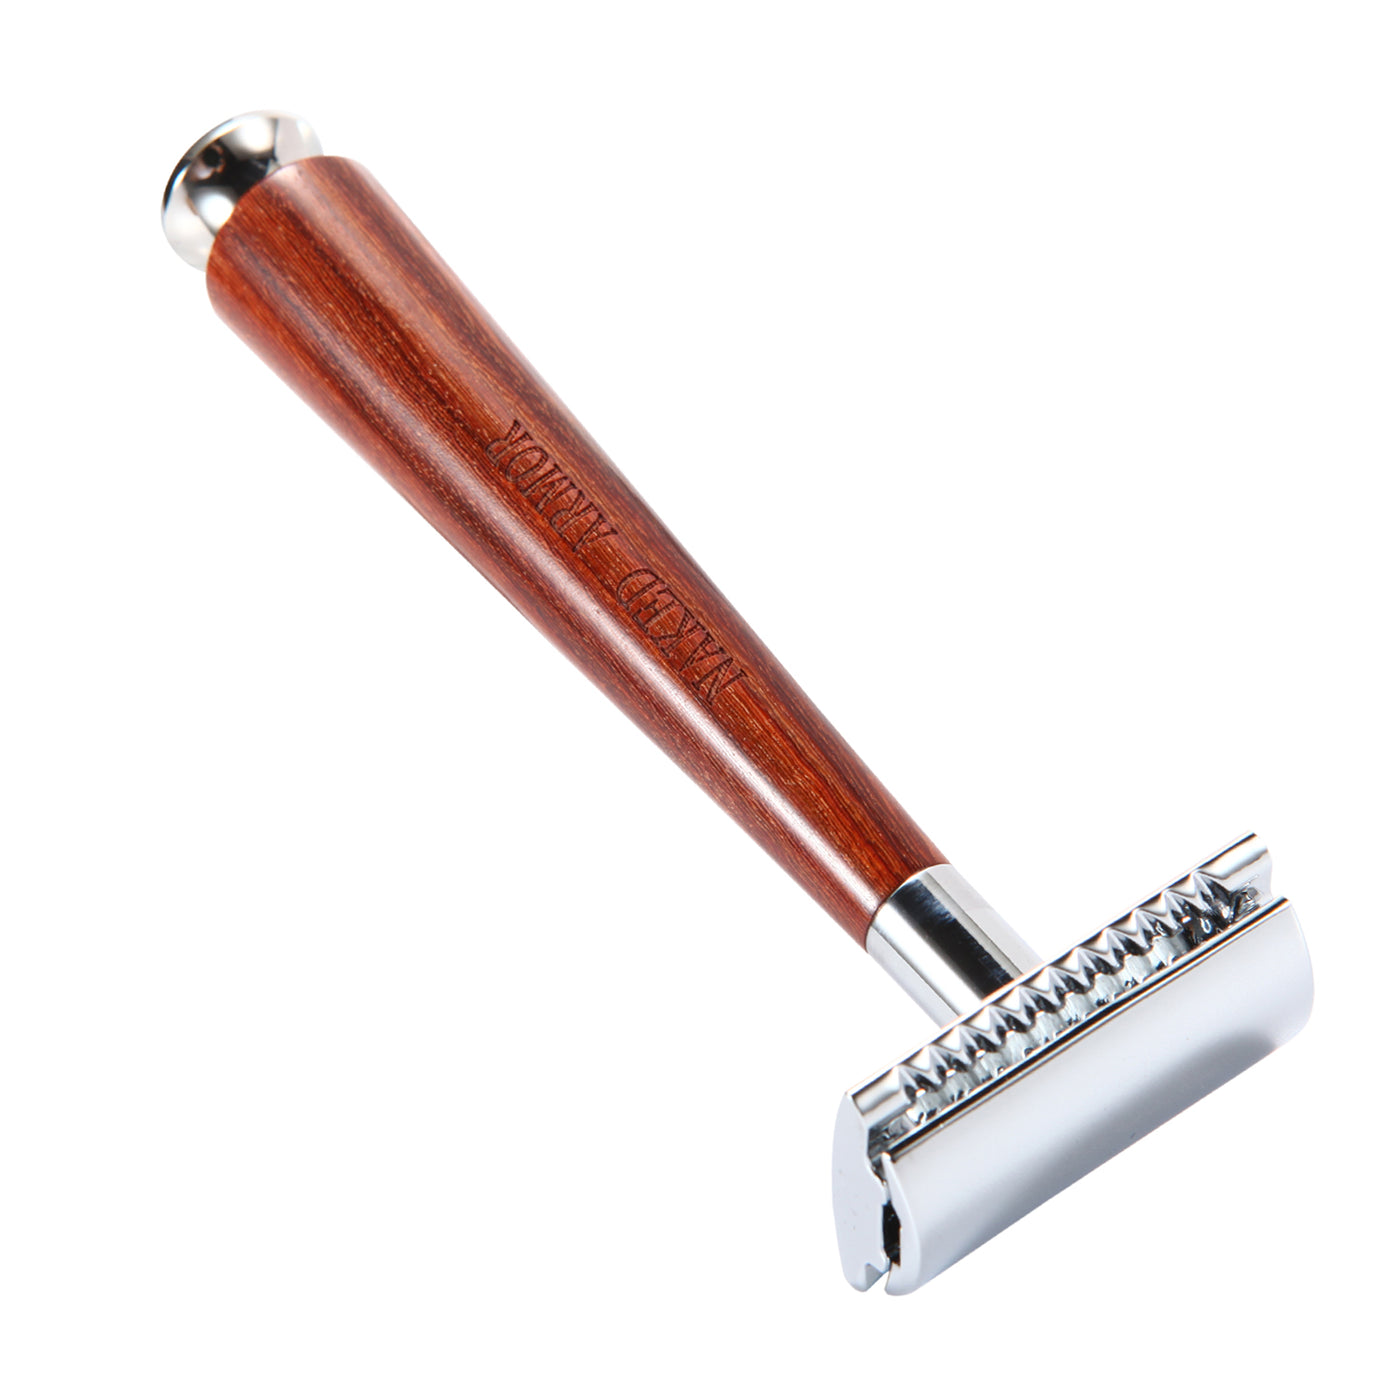  Tor Closed Comb Safety Razor by Naked Armor sold by Naked Armor Razors